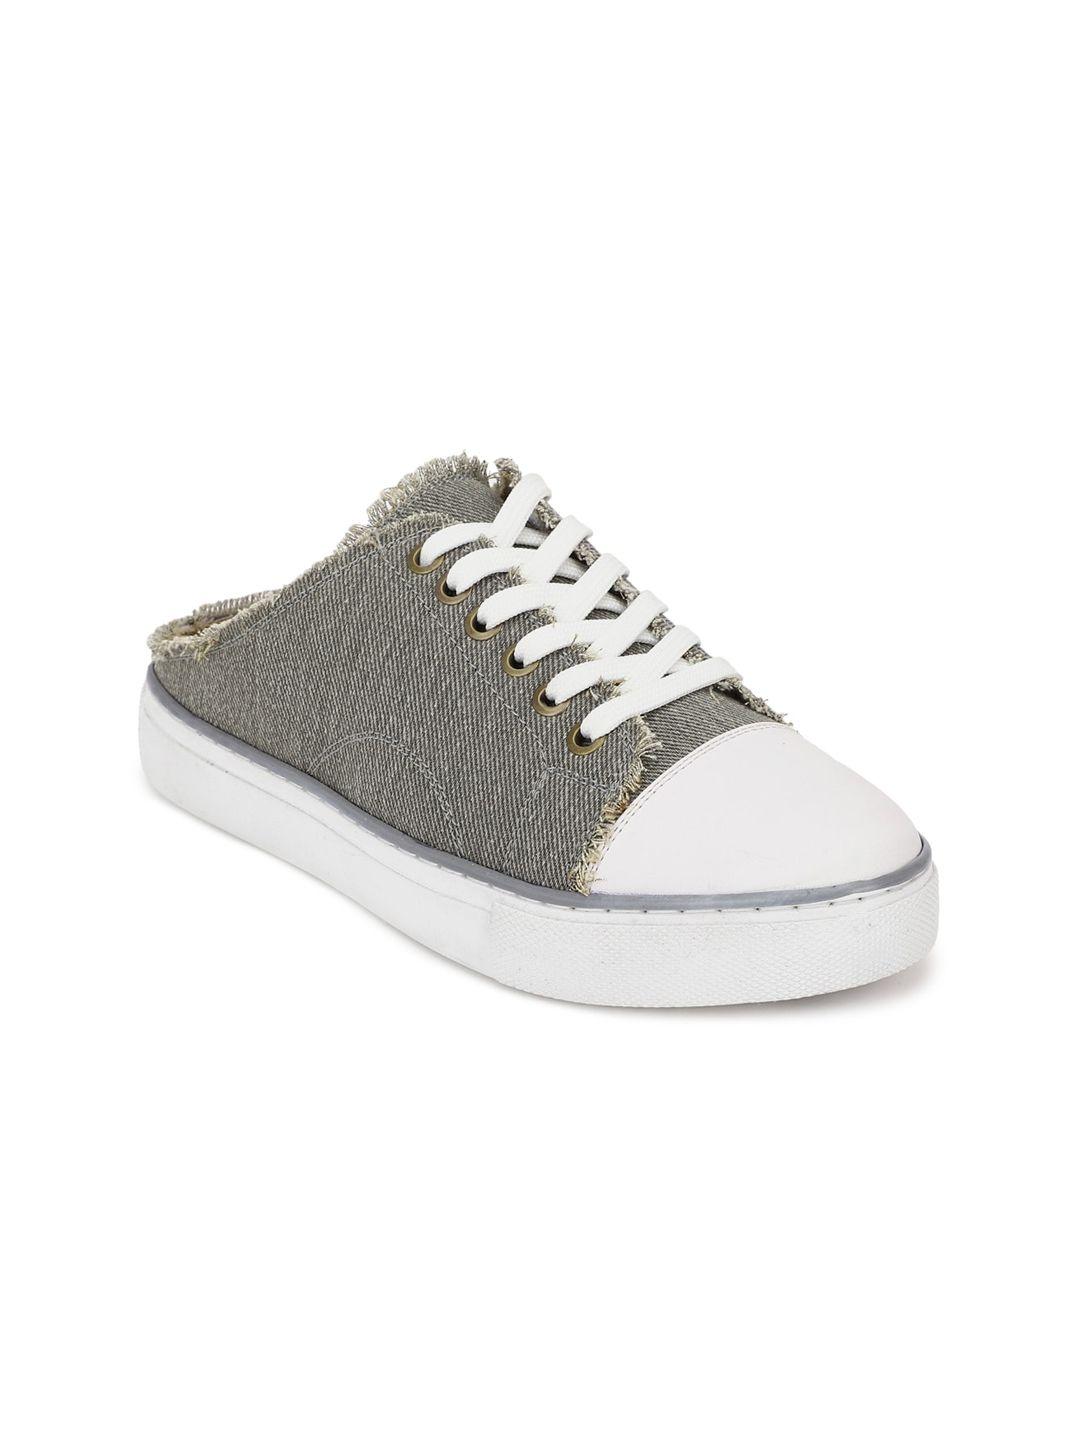 forever 21 women grey woven design pu sneakers